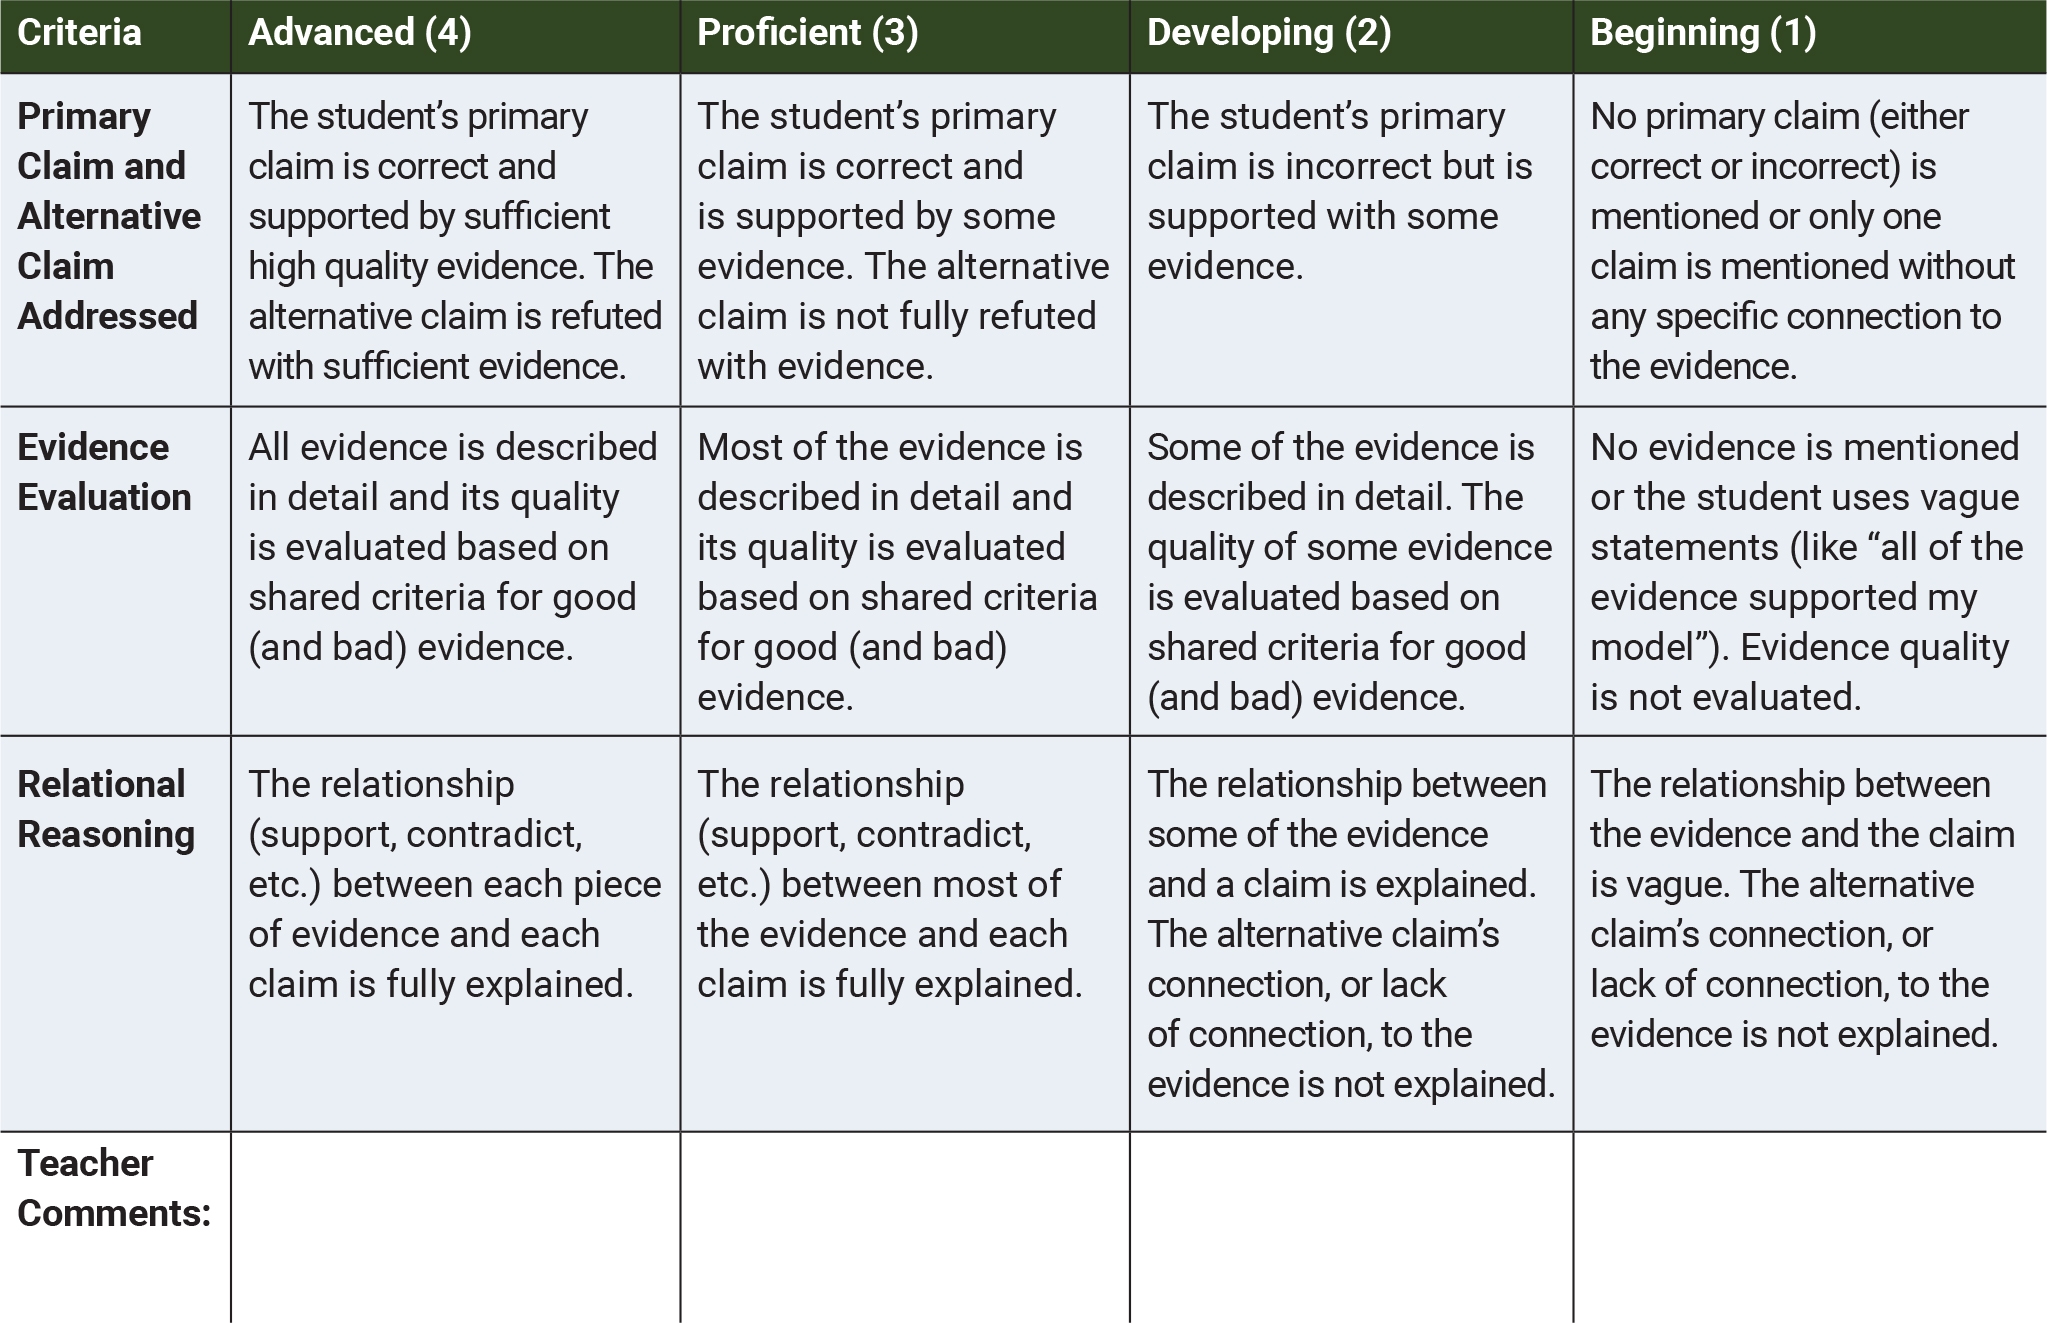 Rubric for written arguments dealing with competing claims.